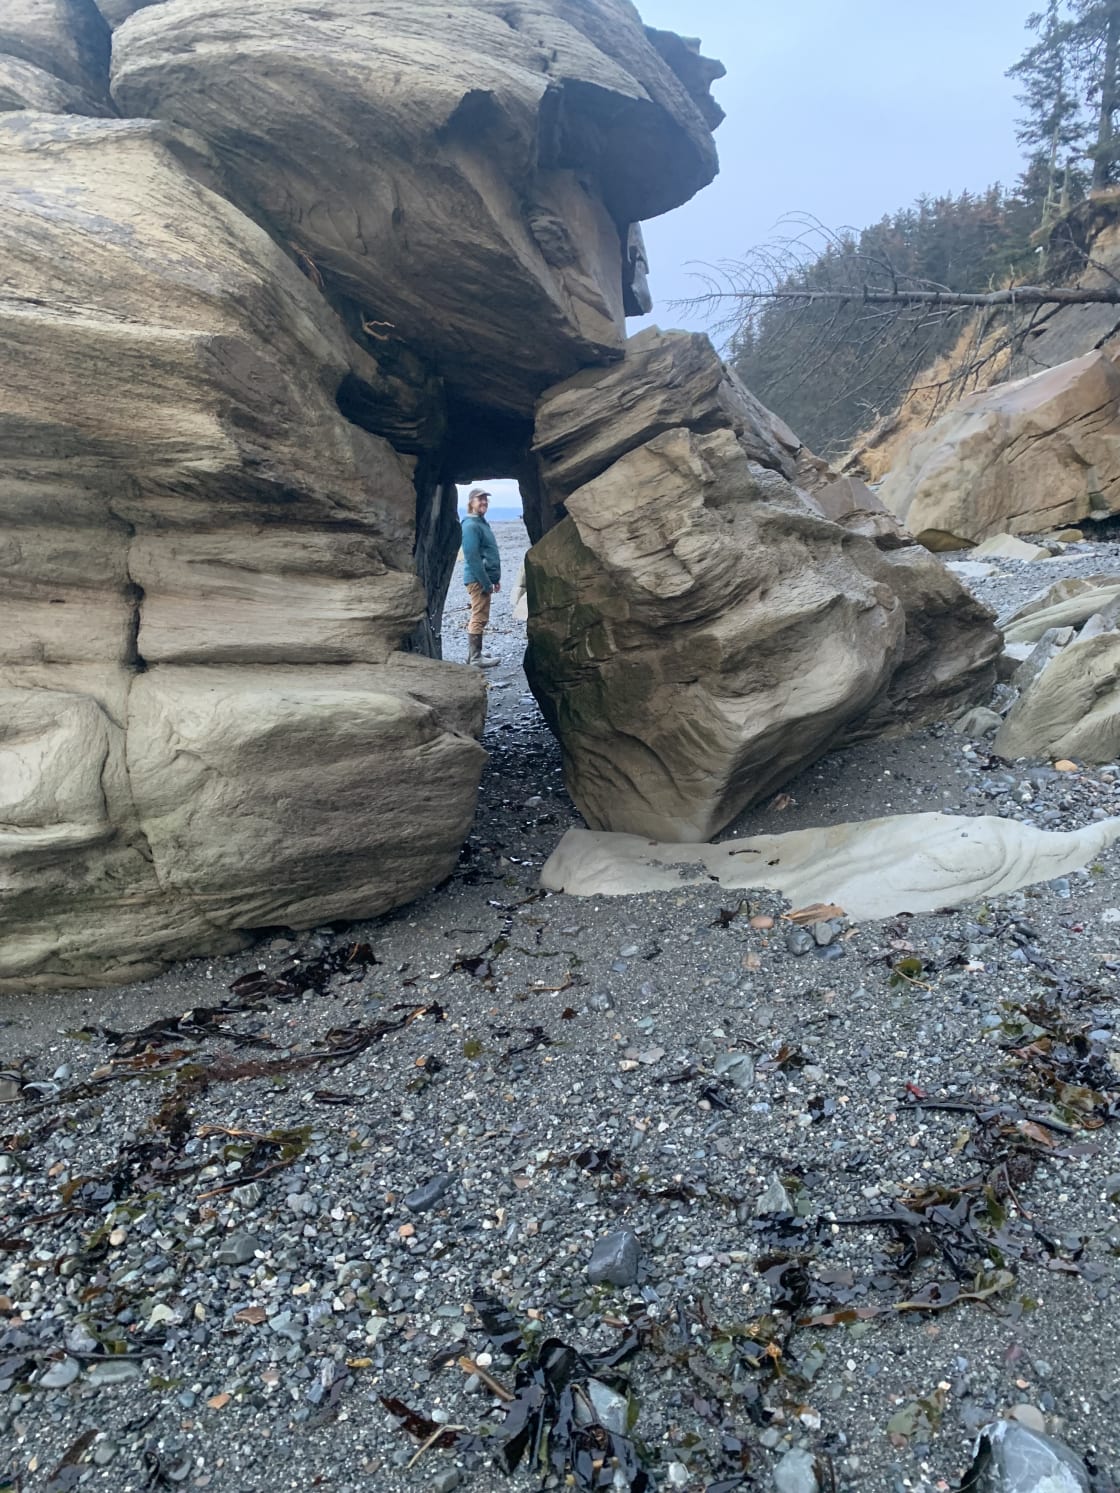 A vigorous hike down the bluff trail has some cool features on the beach